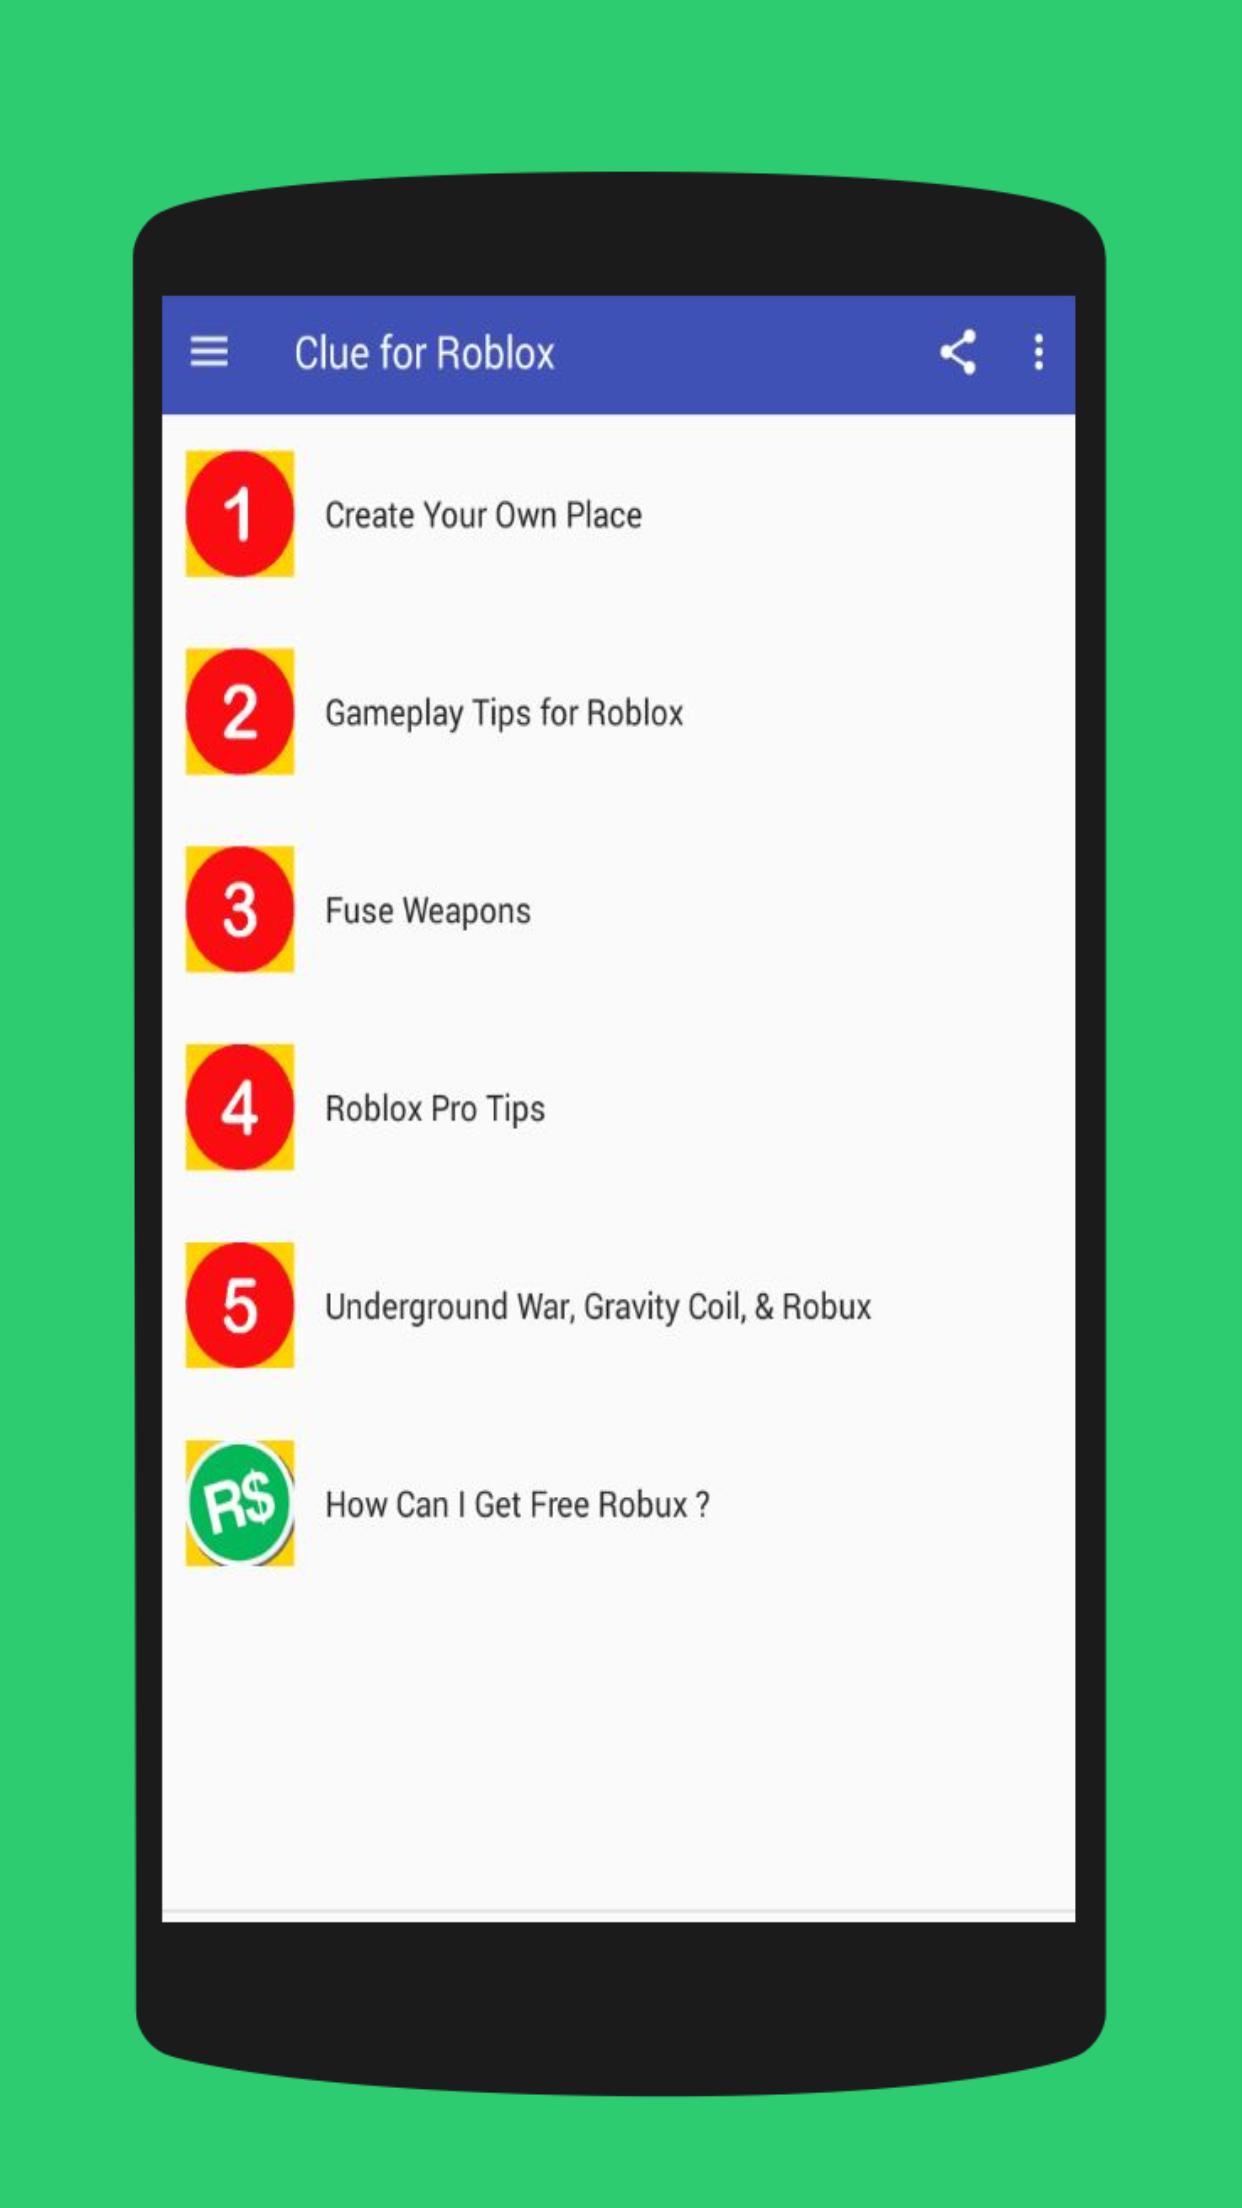 Clue For Roblox For Android Apk Download